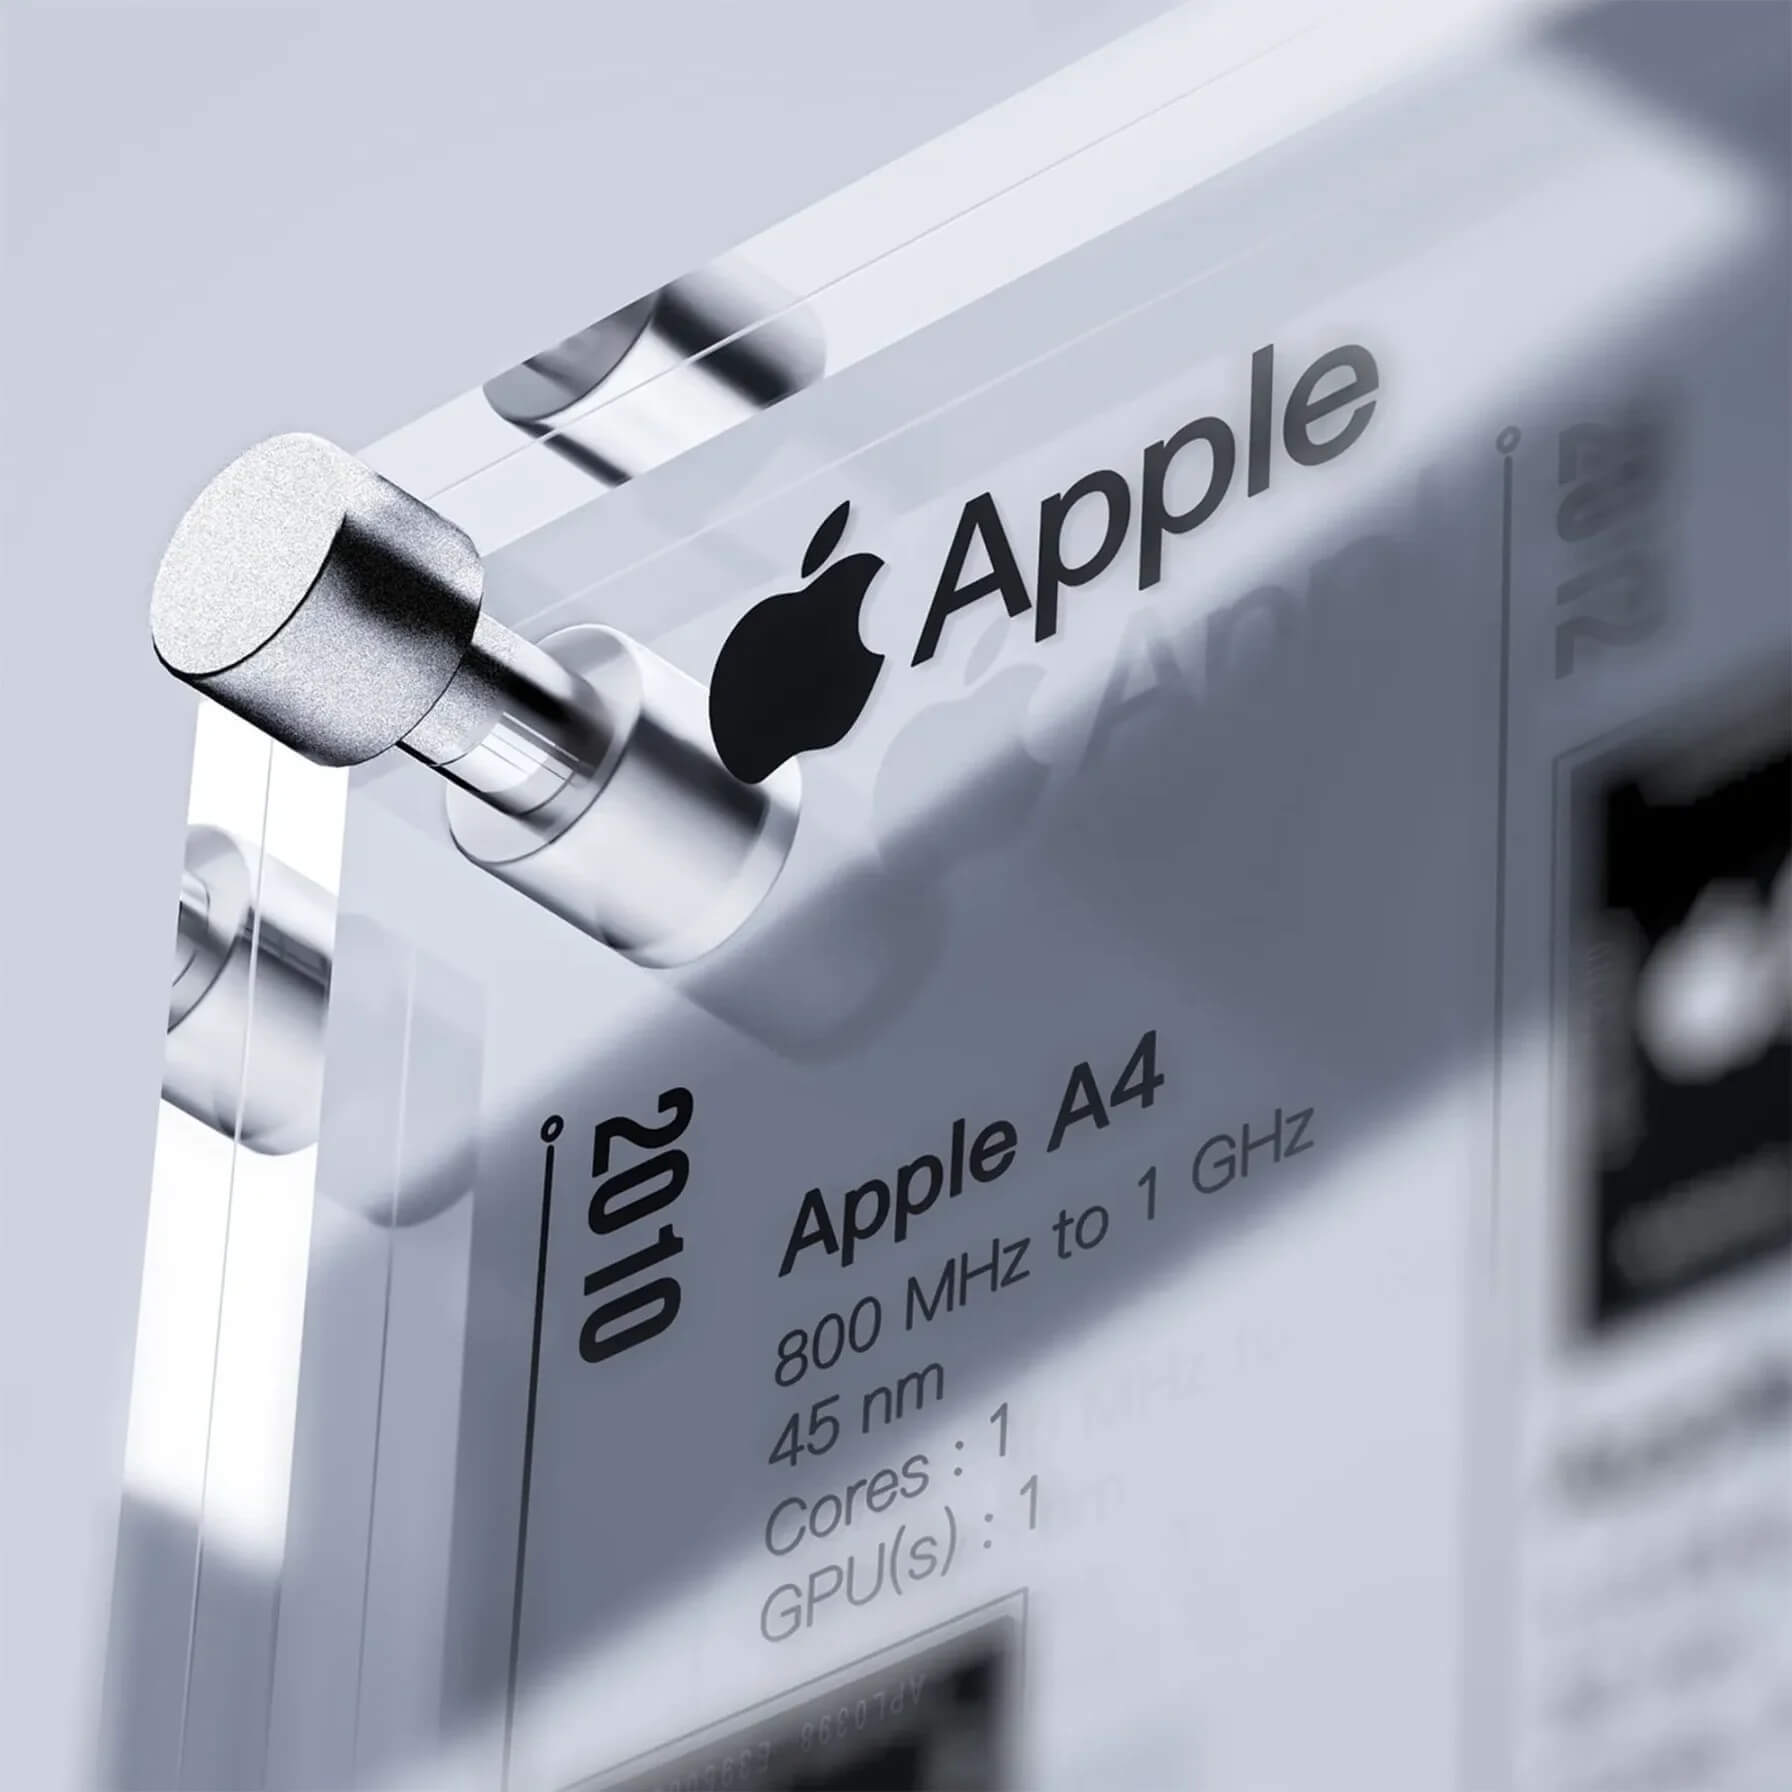 Apple A Series Mobile Processors